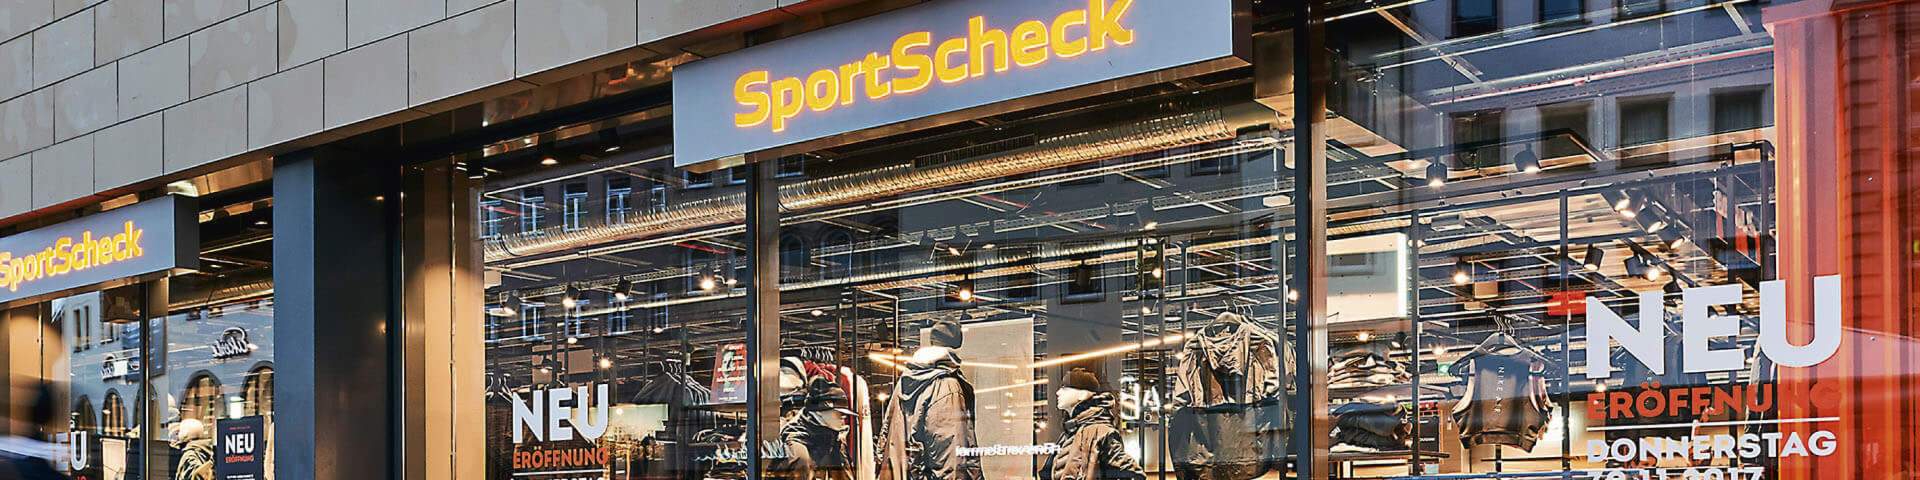 Sportcheck store